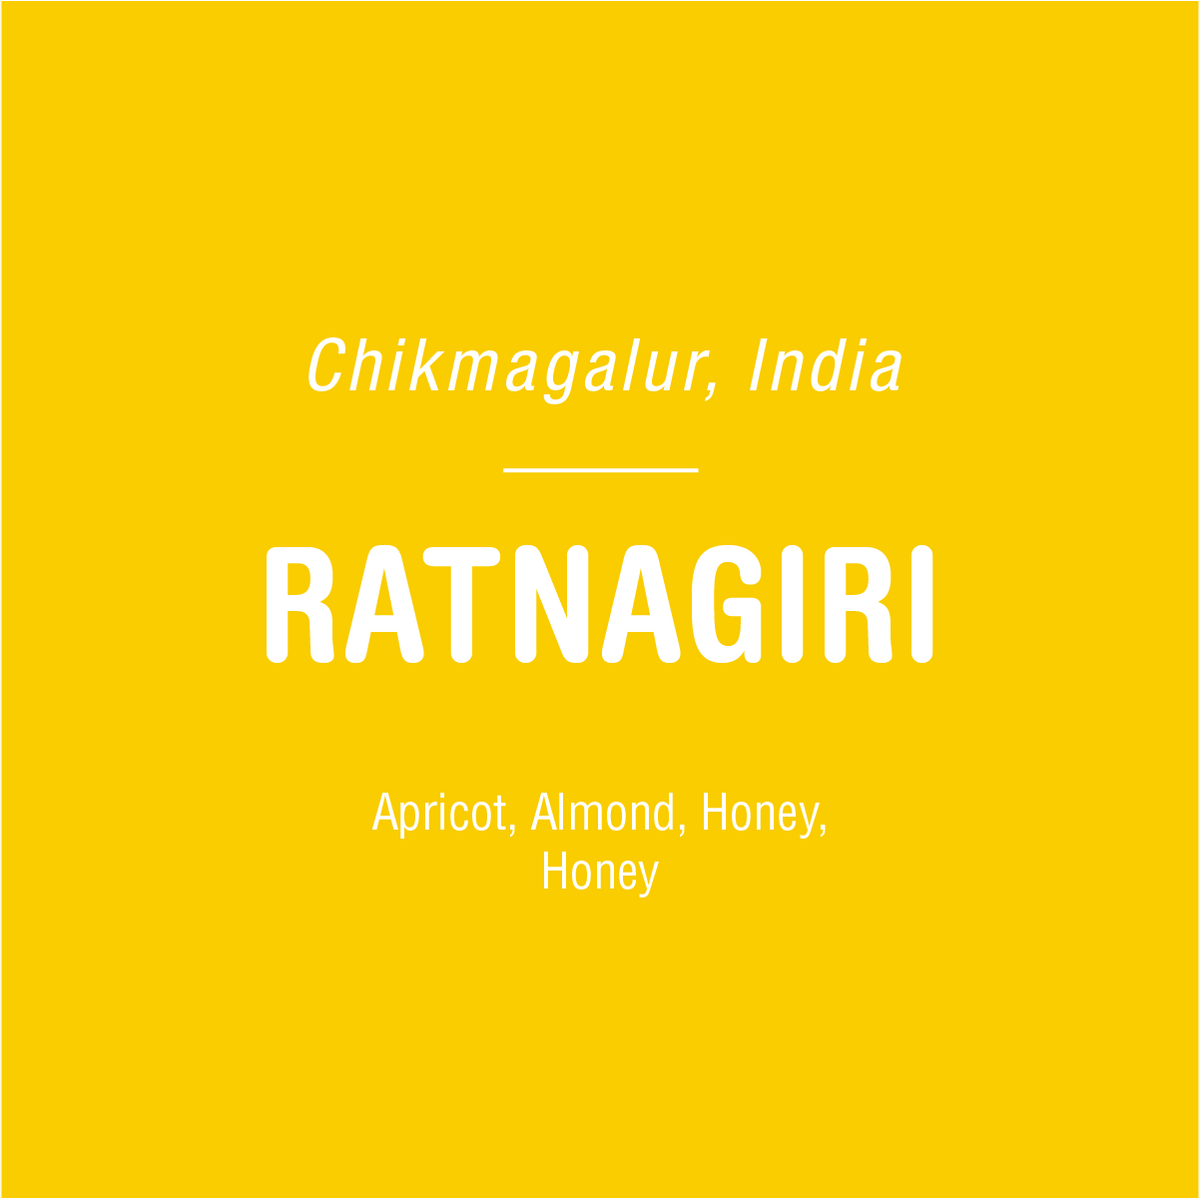 Bright yellow background with bold text. Top text reads "Chikmagalur, India", middle larger text "Tandem Coffee Roasters", and bottom lists flavors "apricot, almond